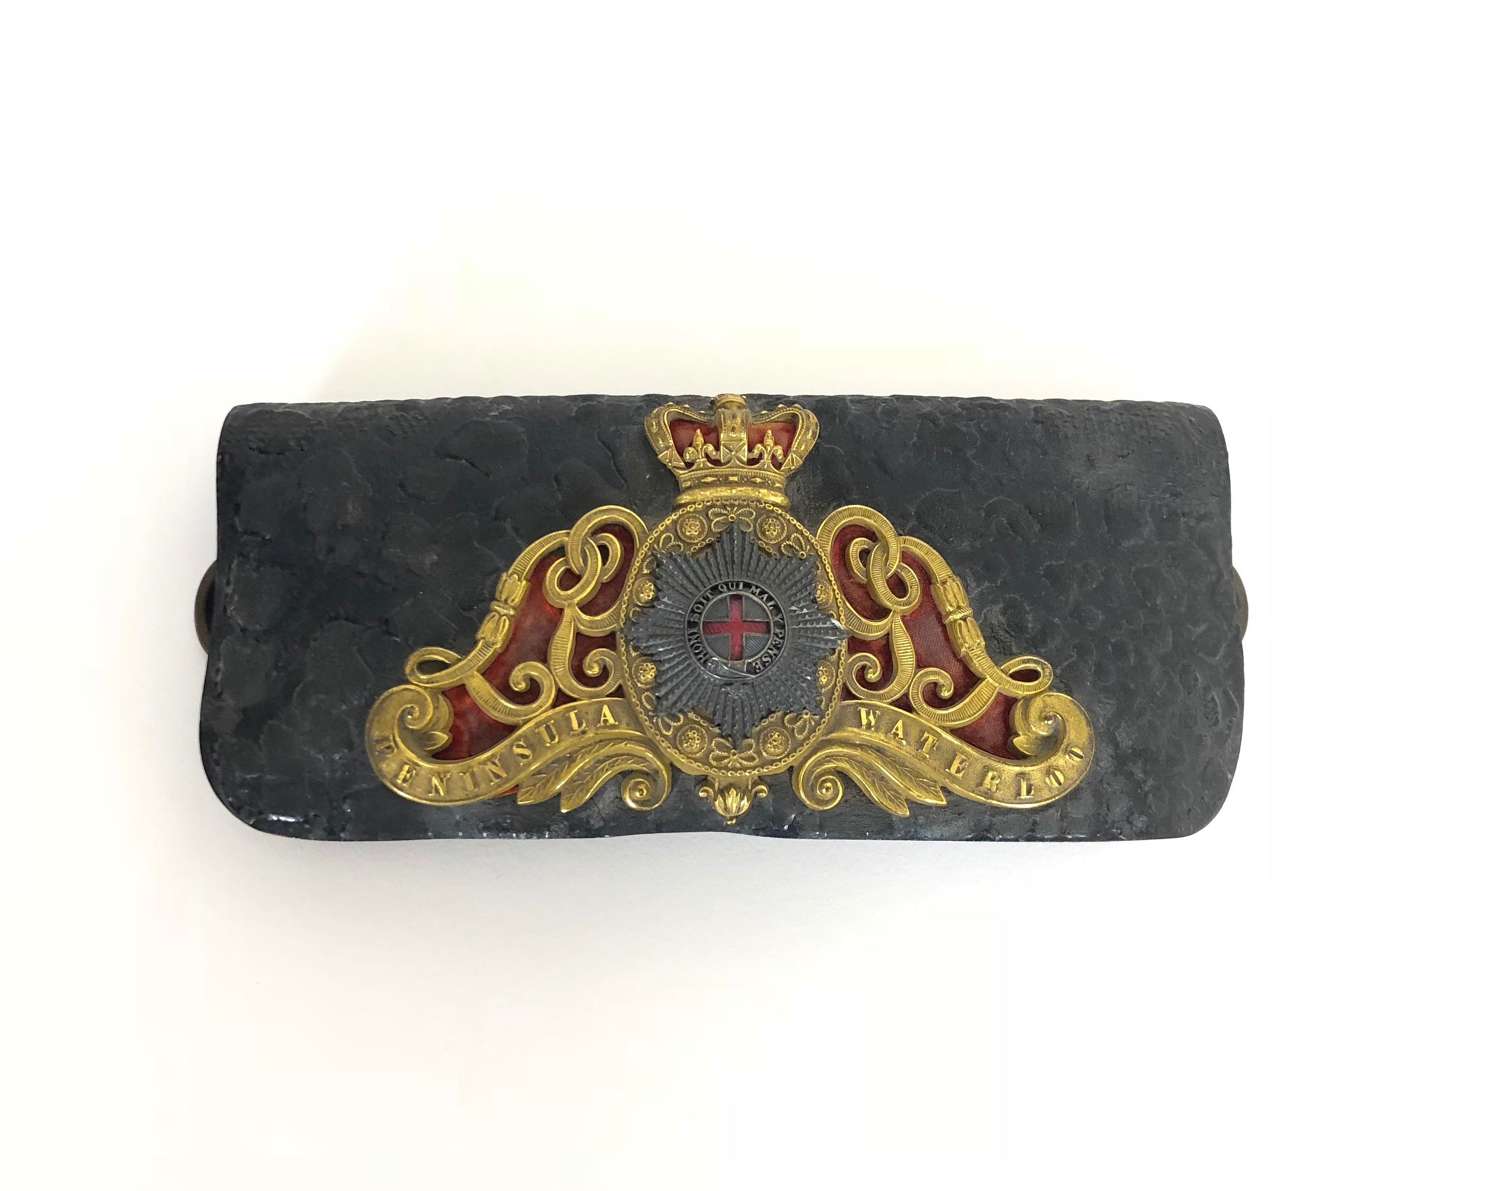 Life Guards Victorian Officer's pouch.